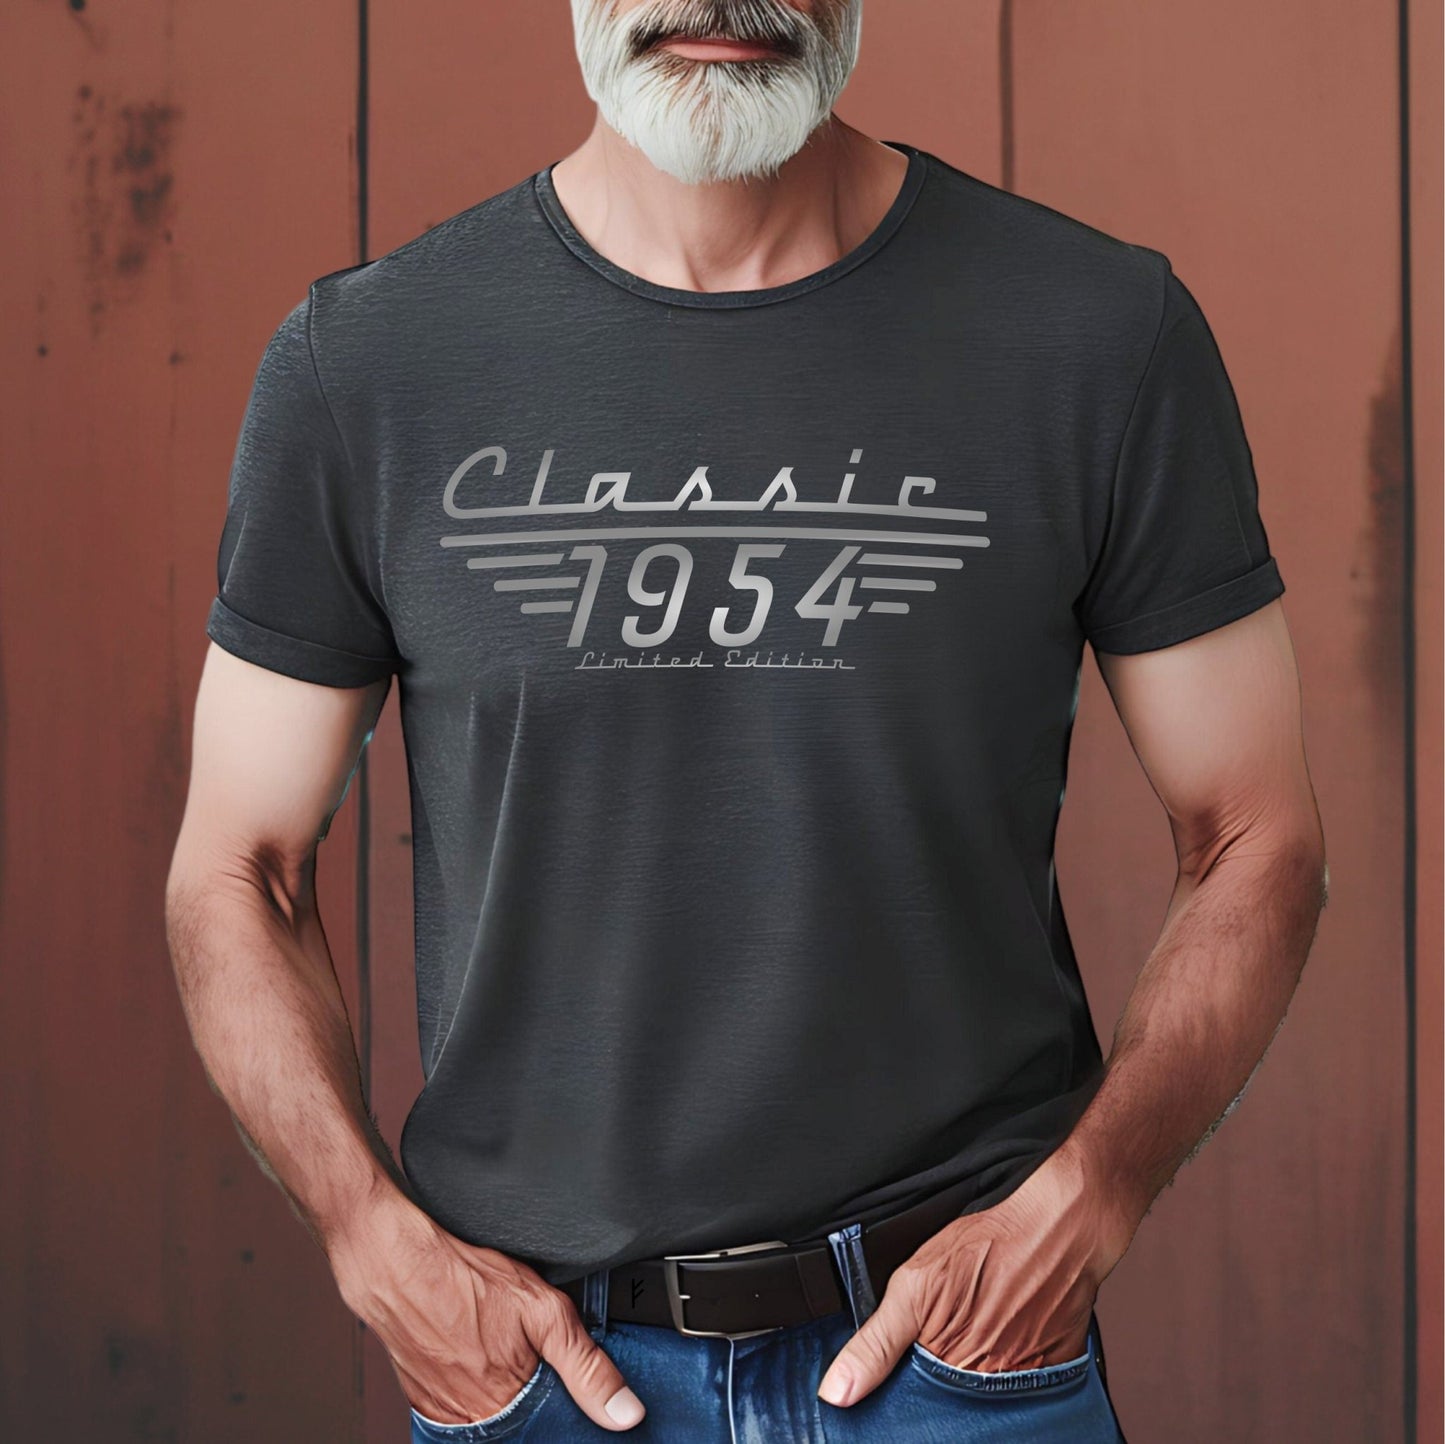 Classic 1954 Limited Ediition 70th Birthday Shirt - SBS T Shop